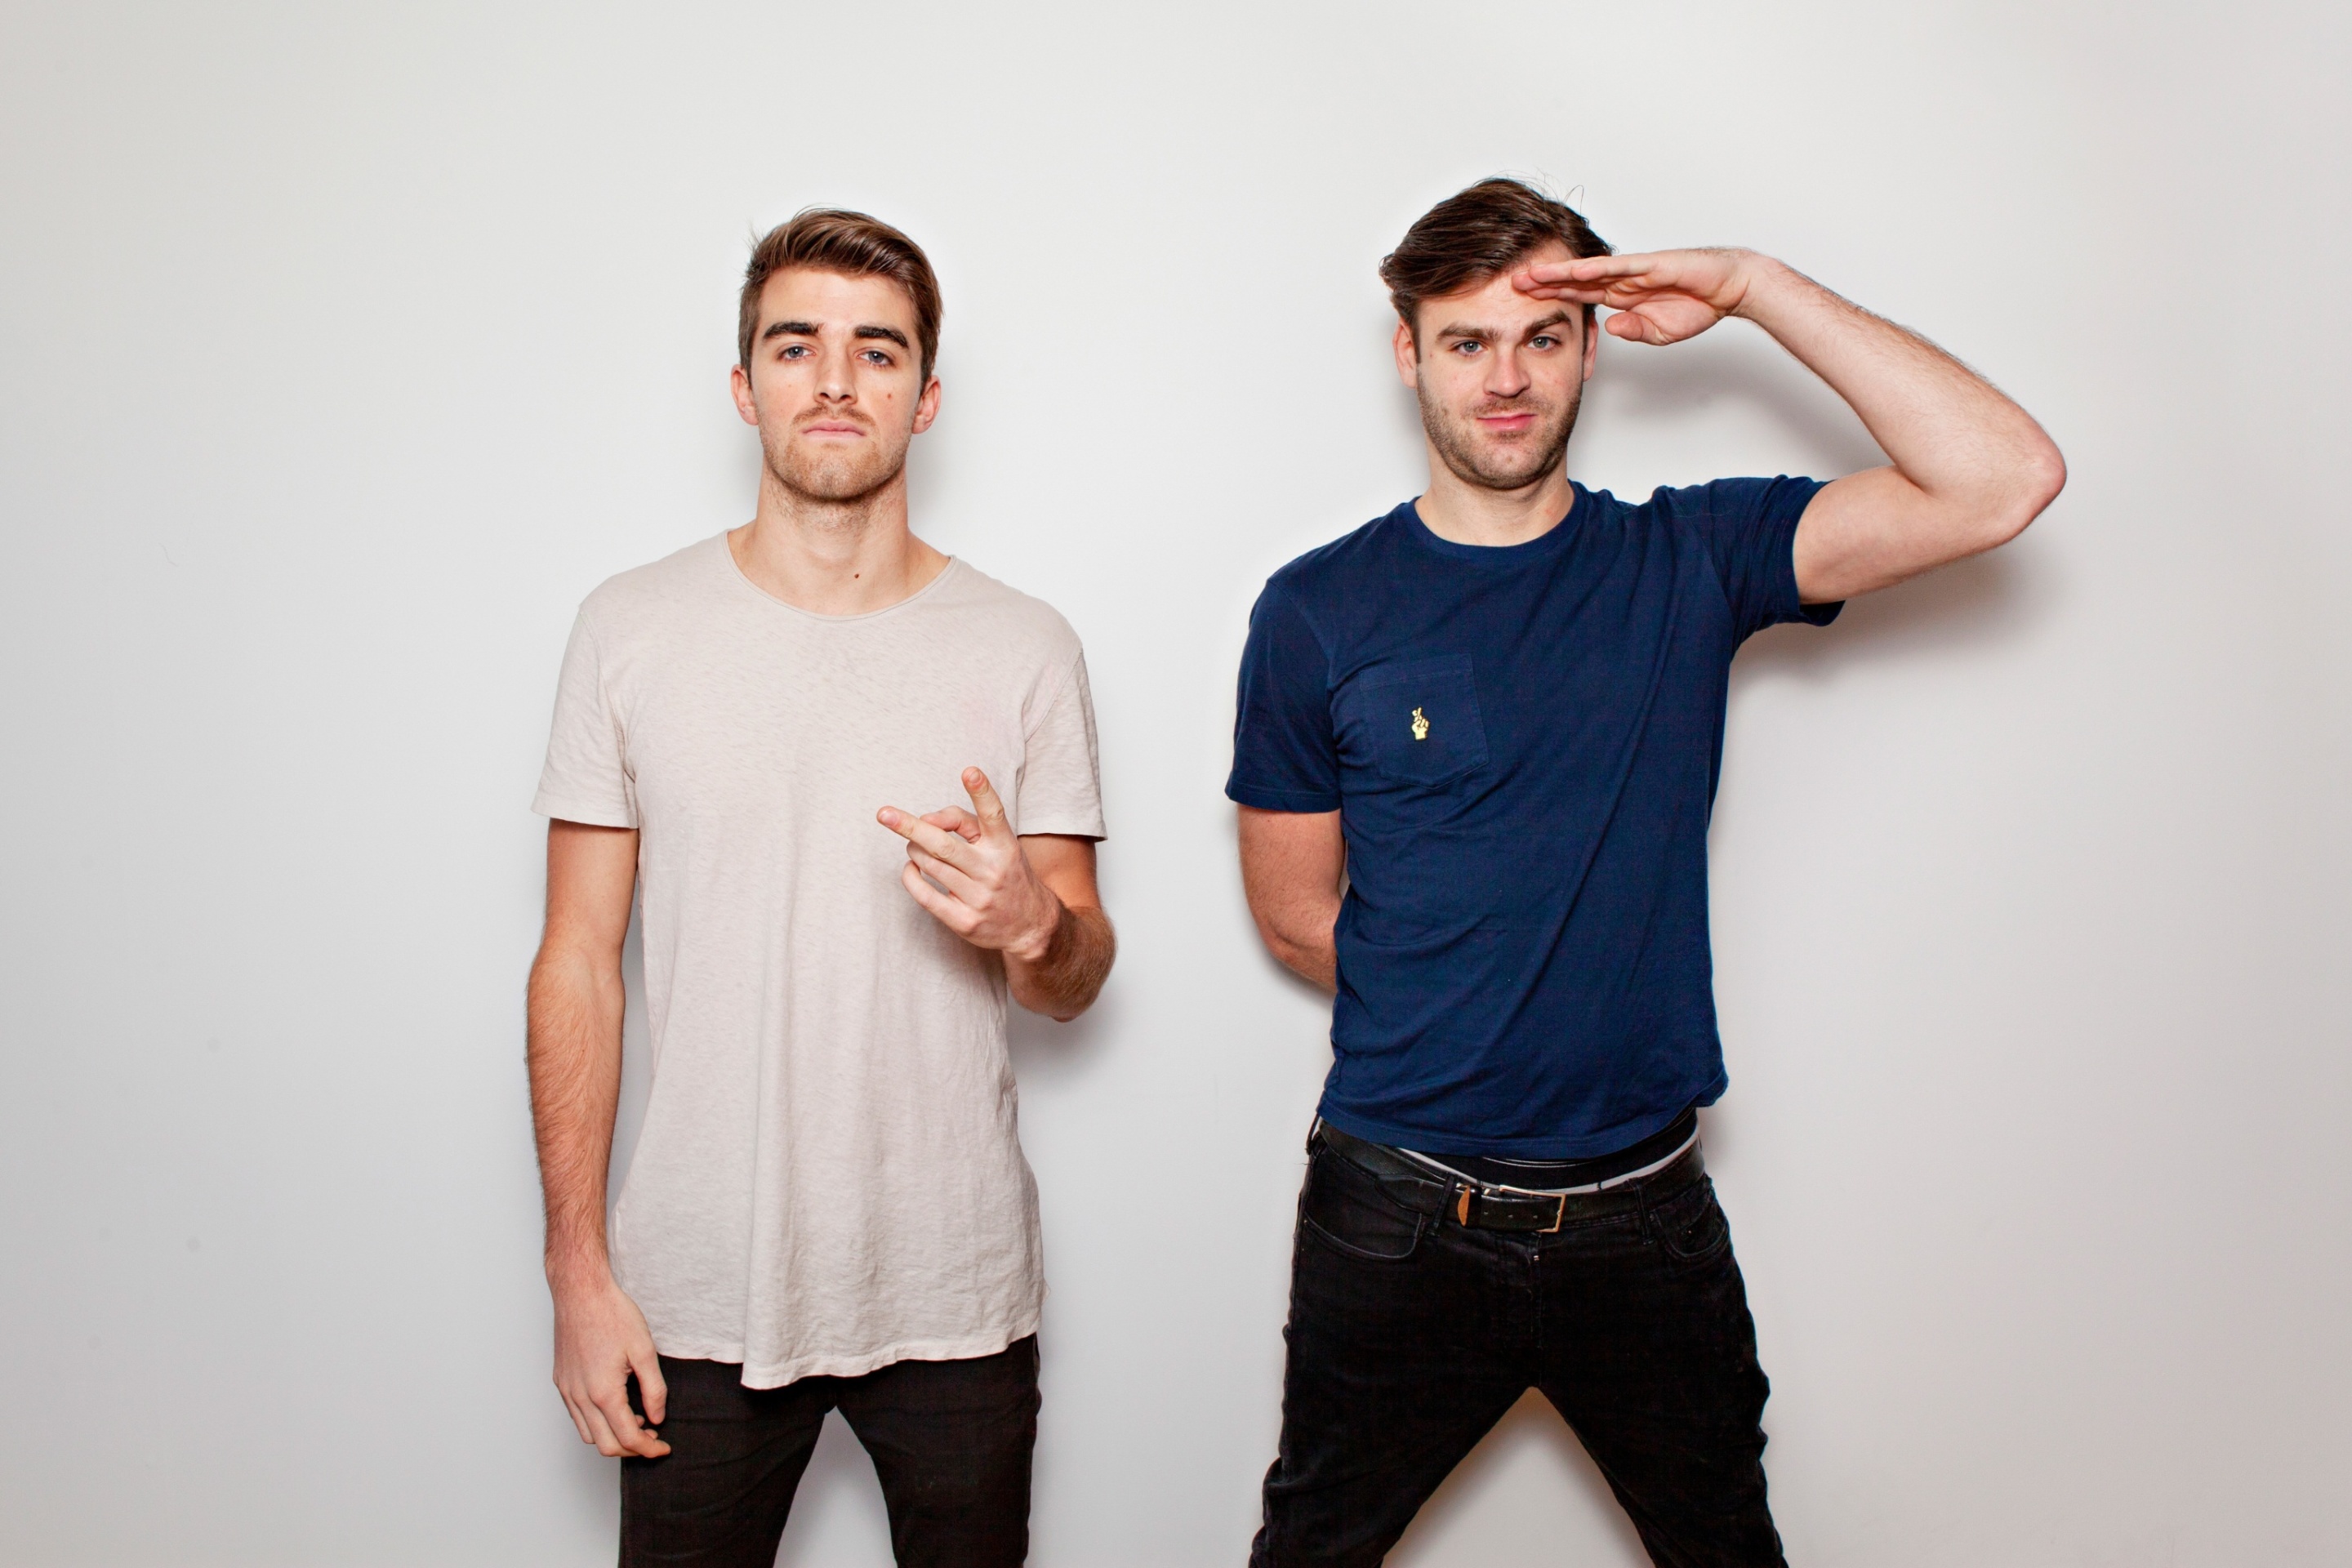 The Chainsmokers with Andrew Taggart and Alex Pall screenshot #1 2880x1920